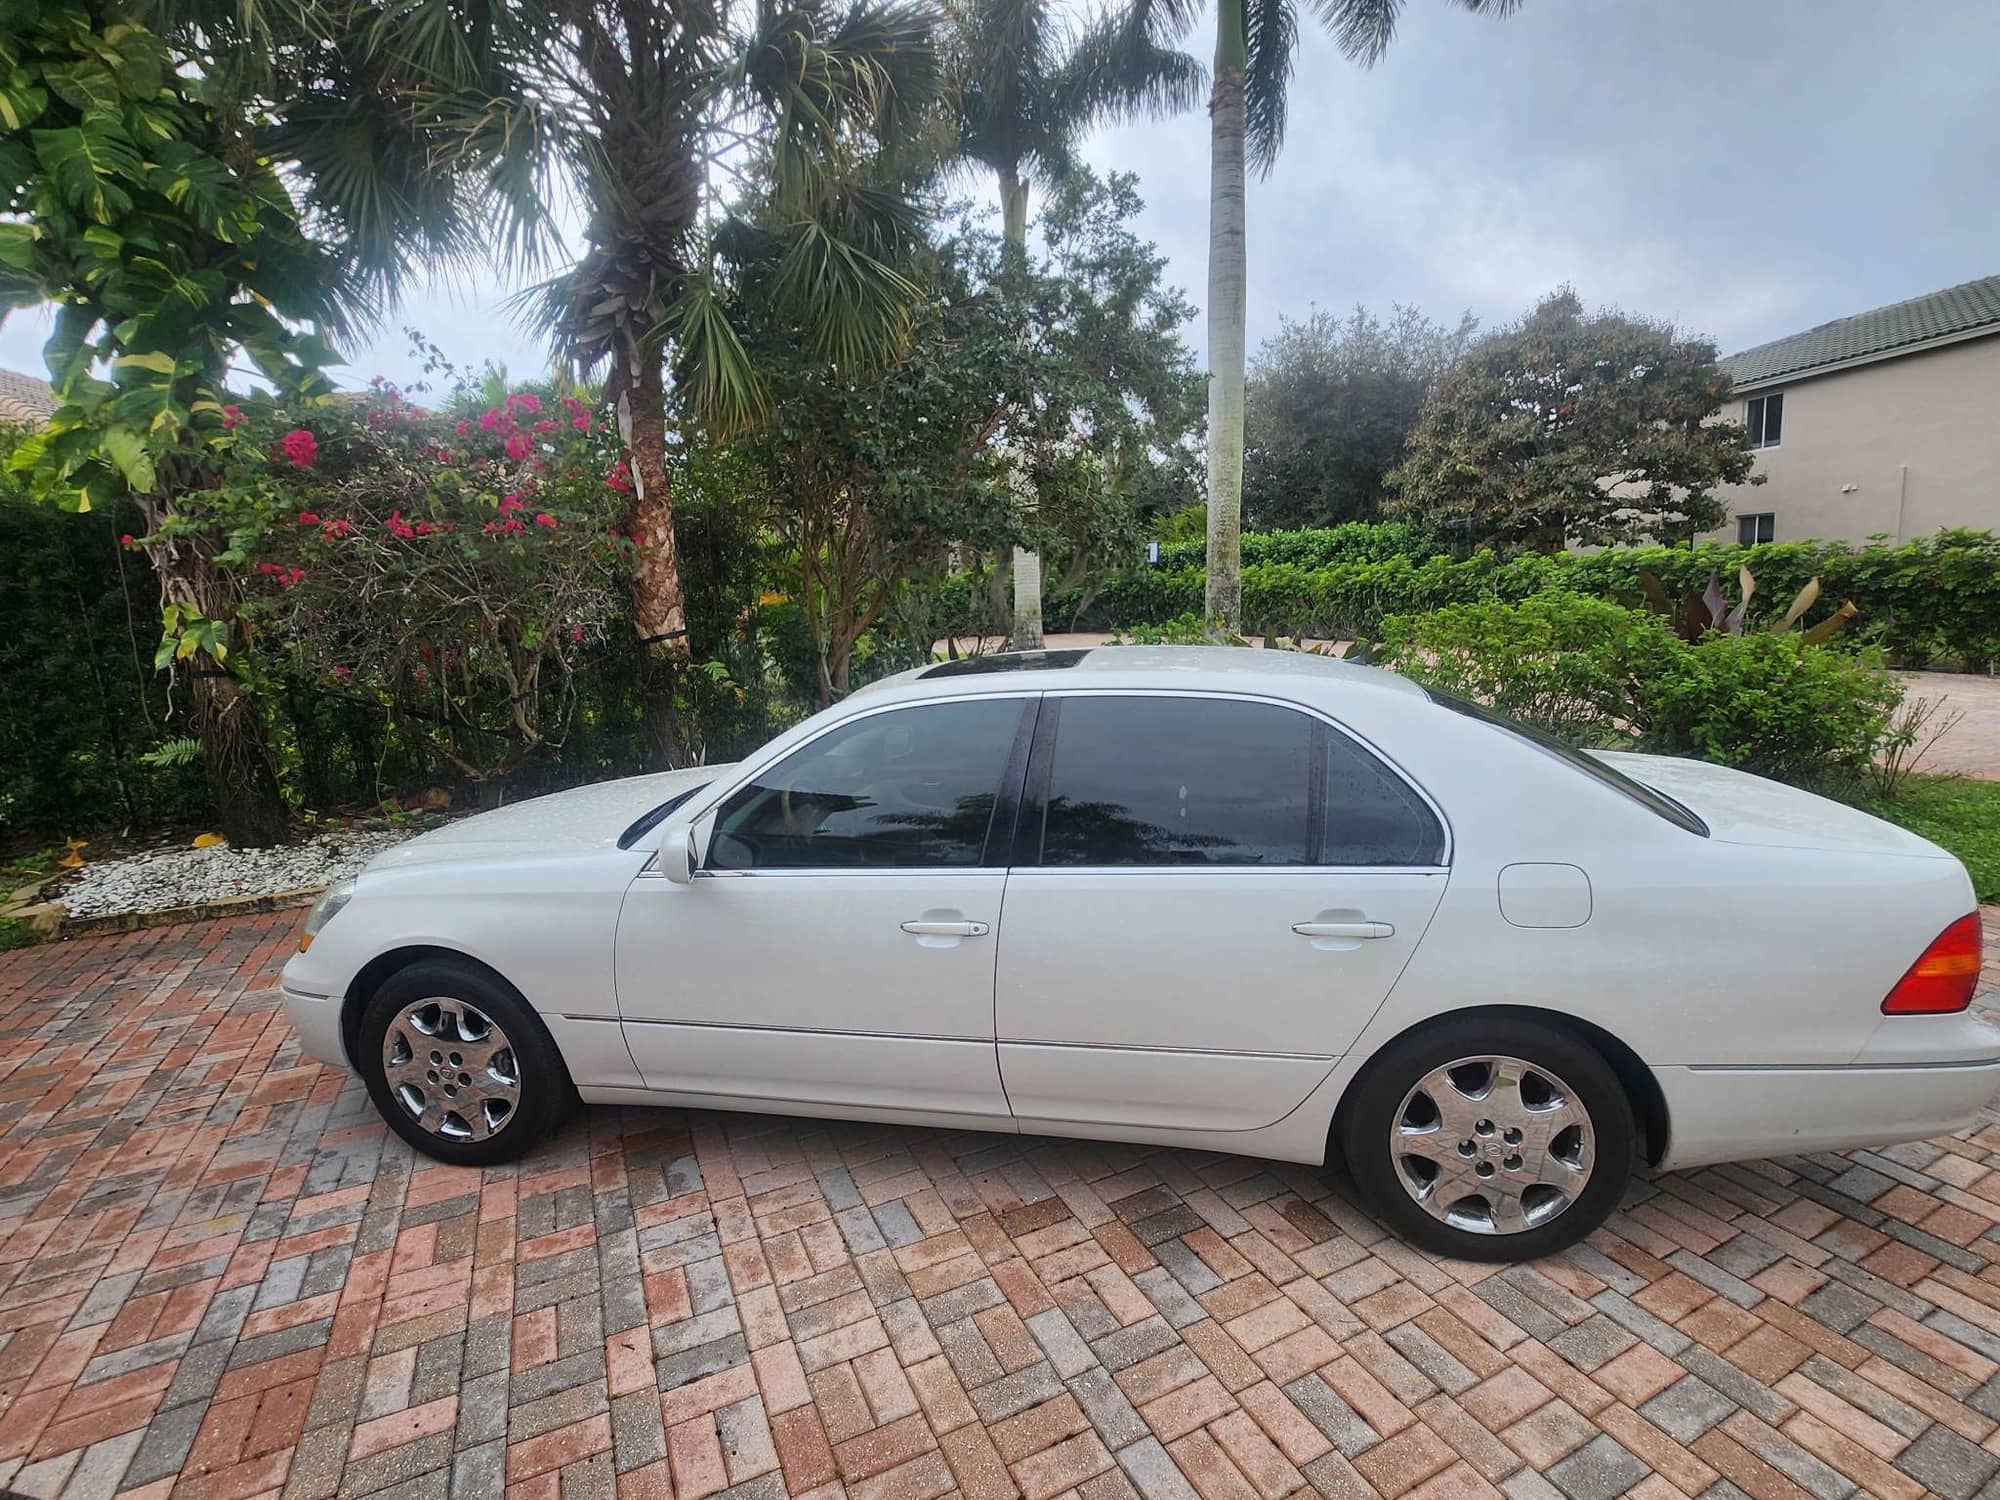 2003 Lexus LS430 - 2003 ls430 turnkey; no accidents/very well maintained - Used - VIN JTHBN30F030116799 - 146,200 Miles - 8 cyl - 2WD - Automatic - Sedan - White - Margate, FL 33063, United States